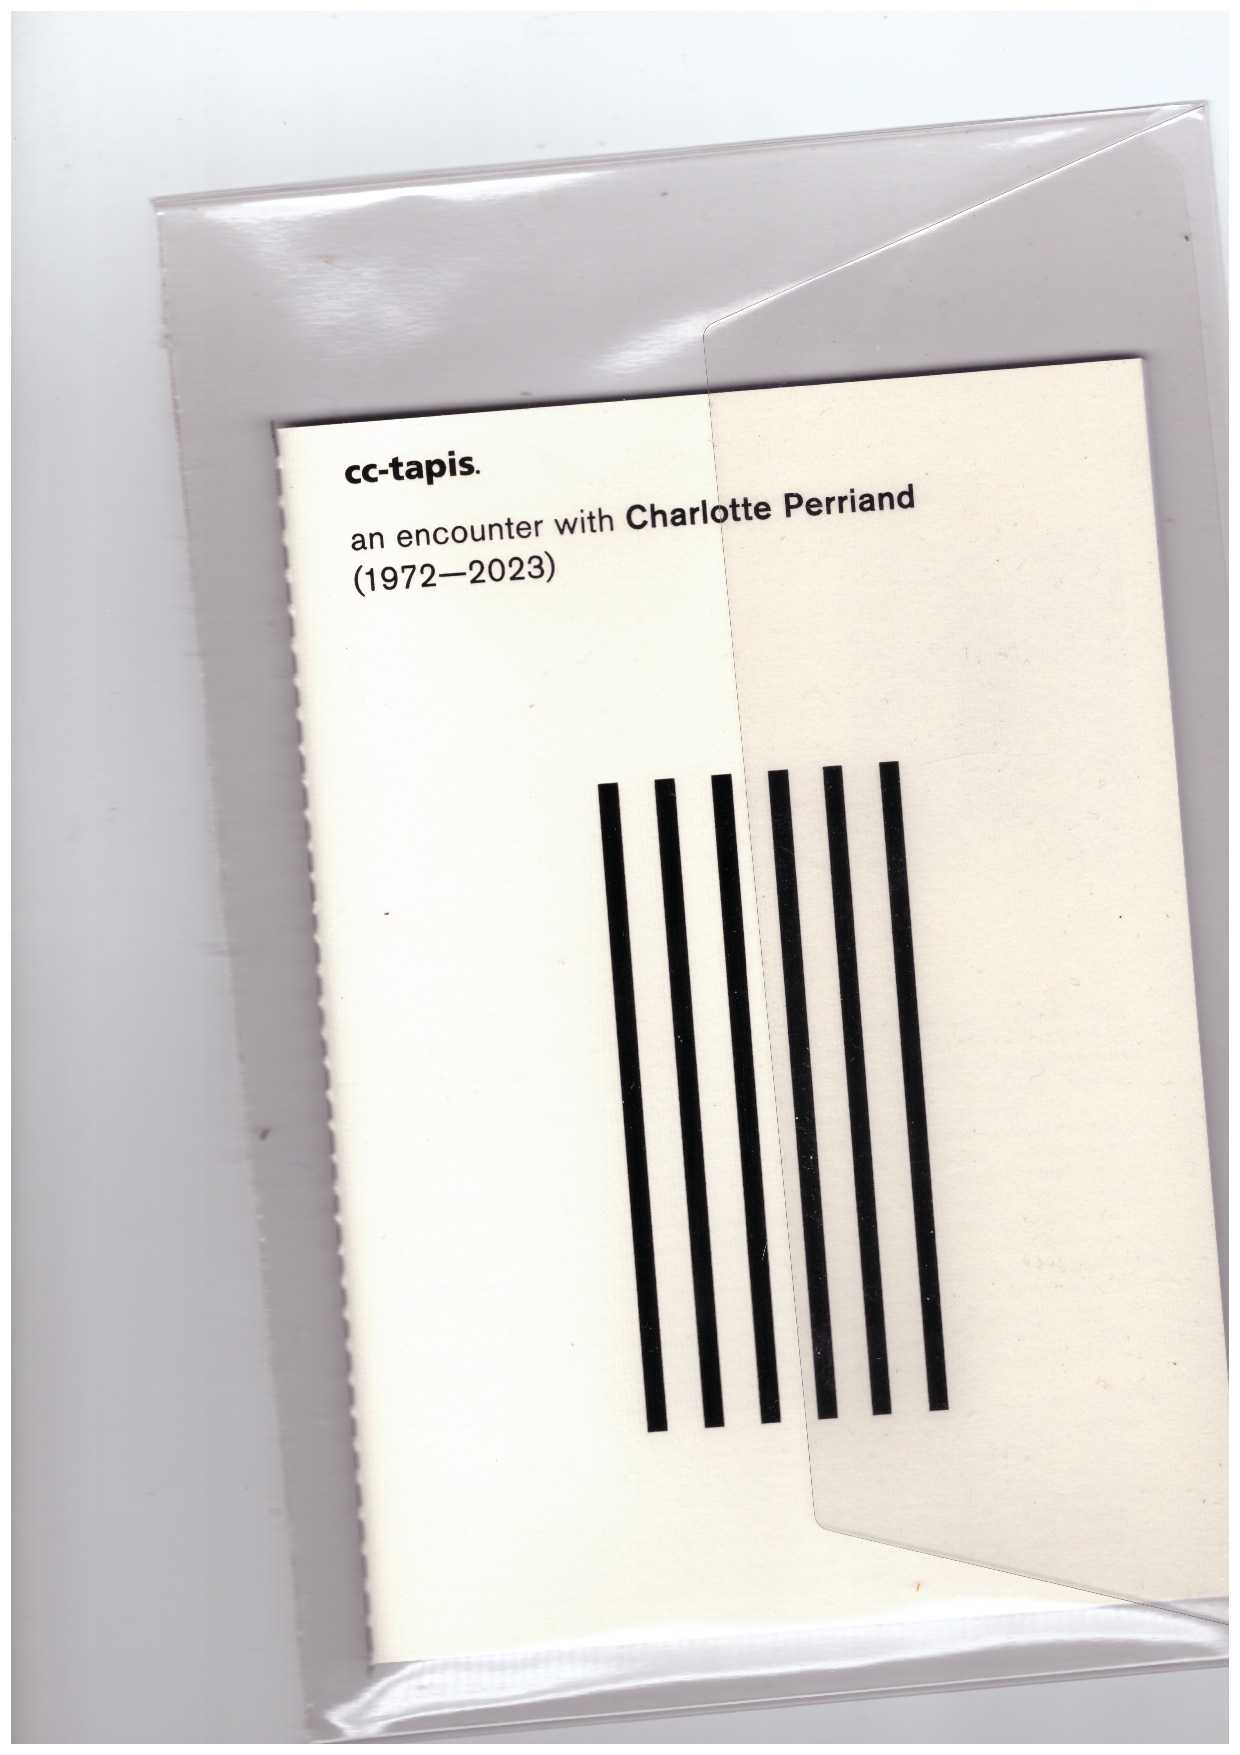 cc tapis - cc-tapis. An encounter with Charlotte Perriand (1972-2023)